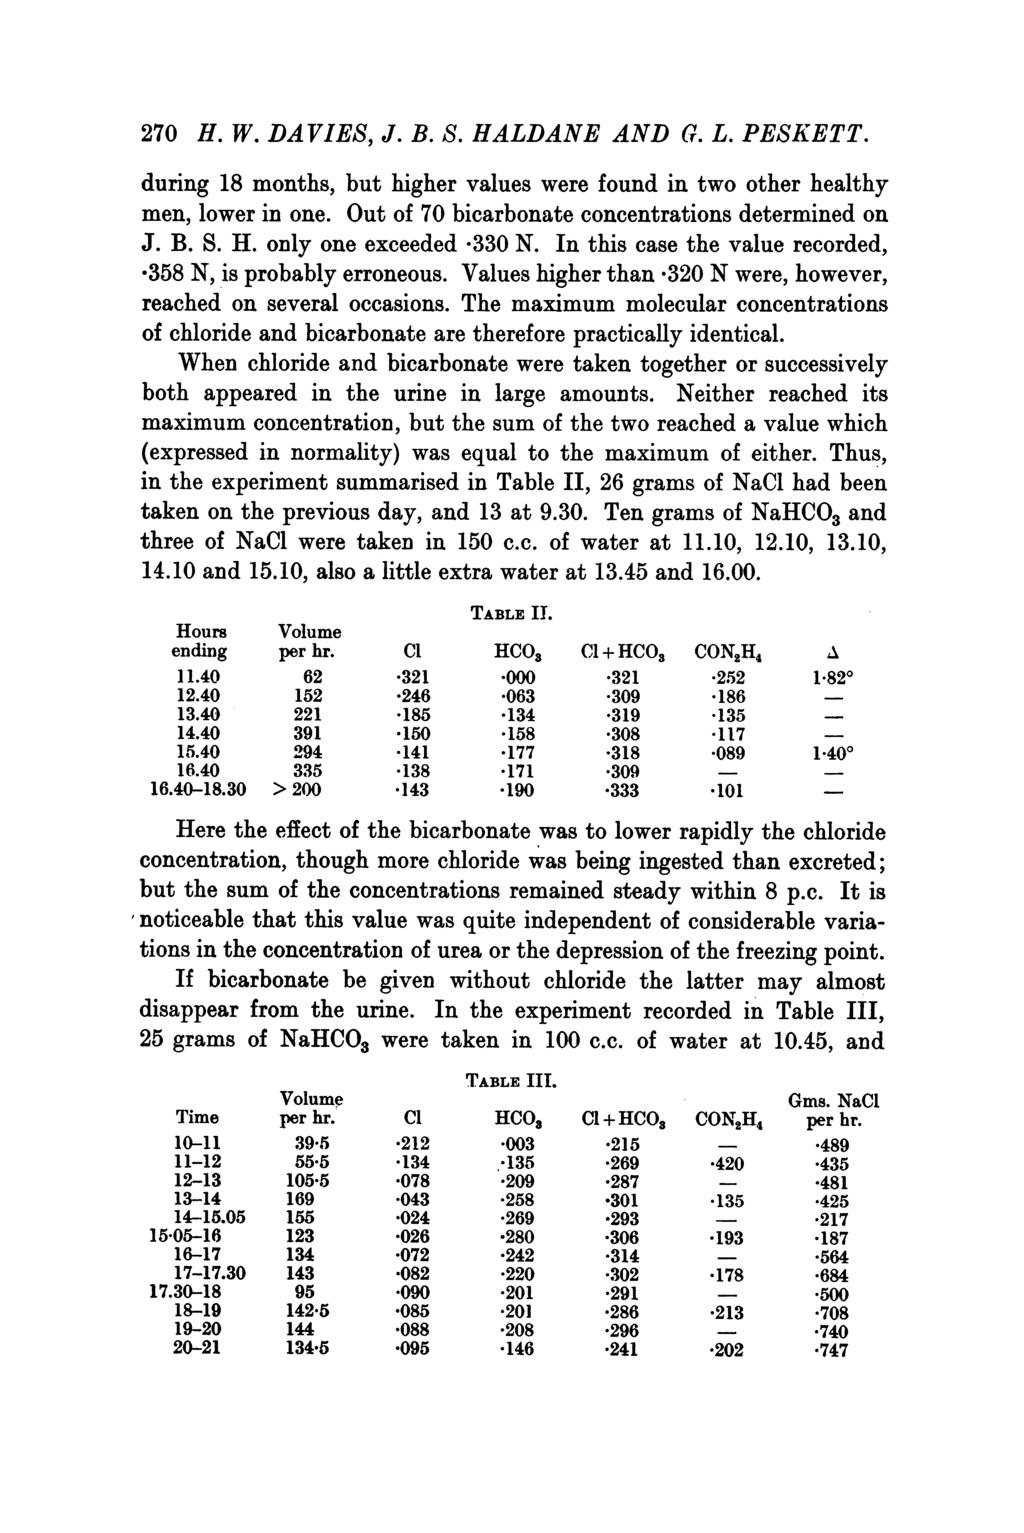 270 H. W. DAVIES, J. B. S. HALDANE AND G. L. PESKETT. during 18 months, but higher values were found in two other healthy men, lower in one. Out of 70 bicarbonate concentrations determined on J. B. S. H. only one exceeded *330 N.